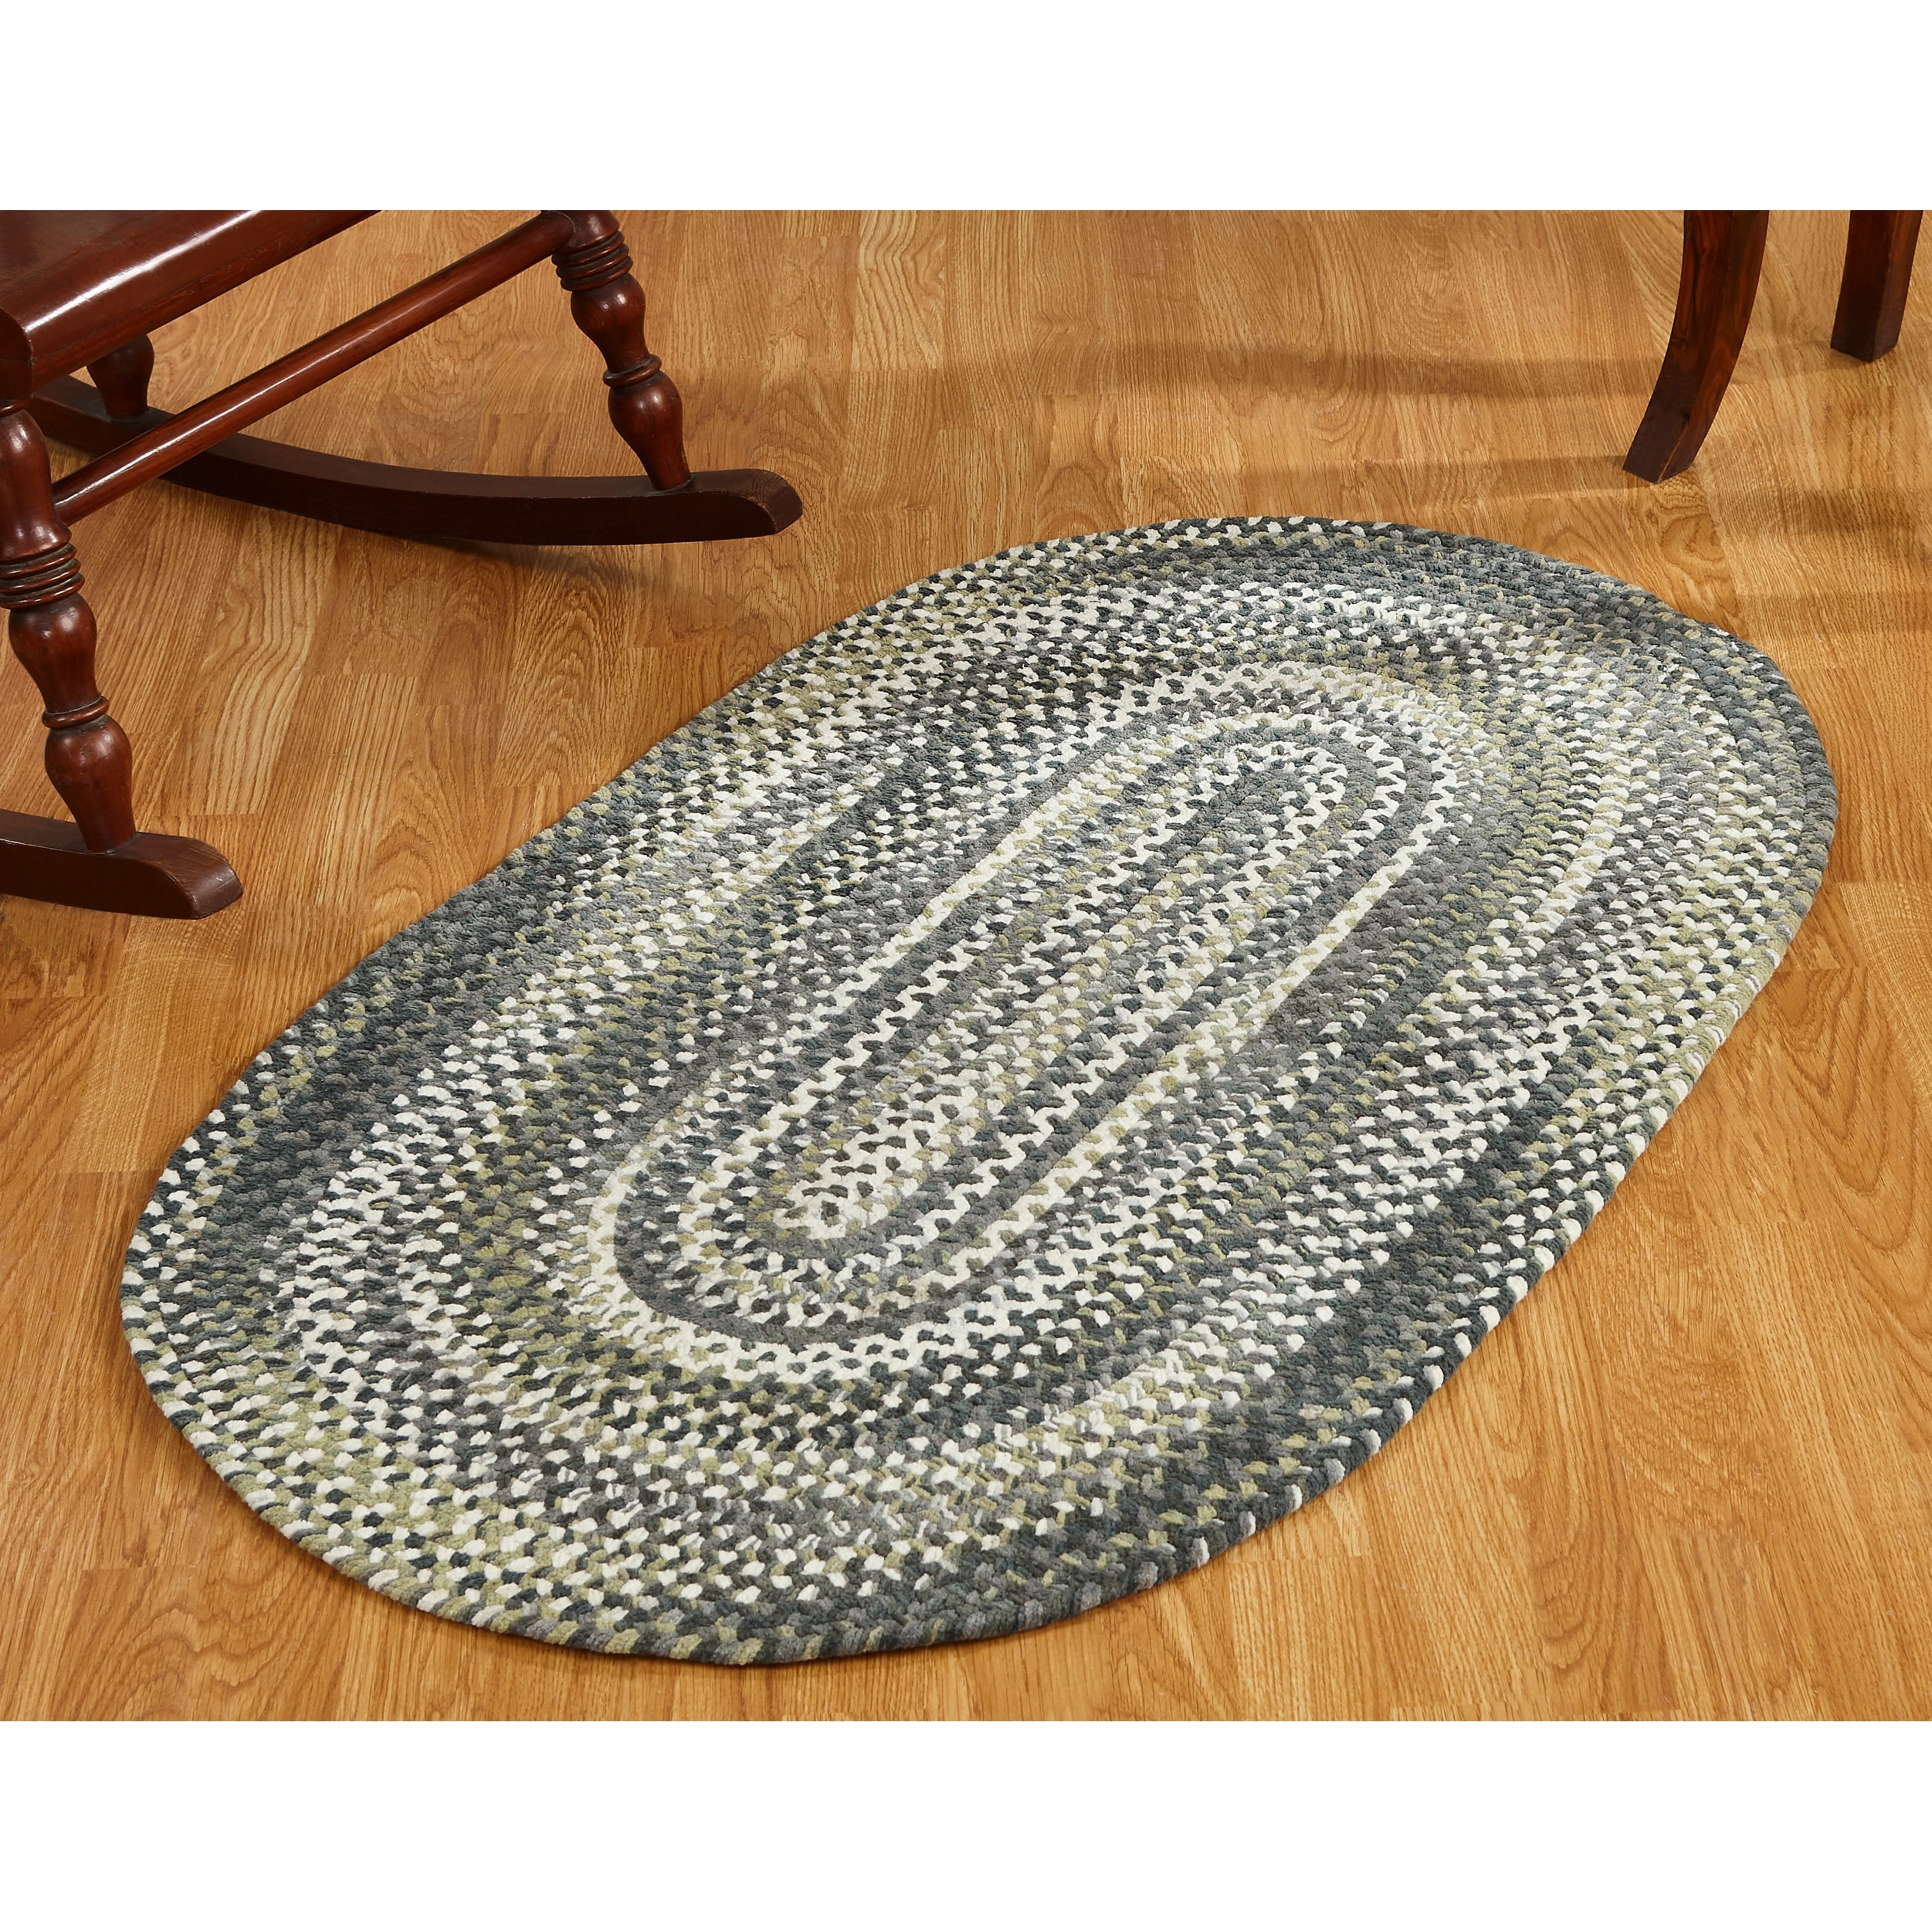 Colonial Mills Colonial Mills Tremont Palm Green 5 ft. x 7 ft. Oval Indoor  Rug